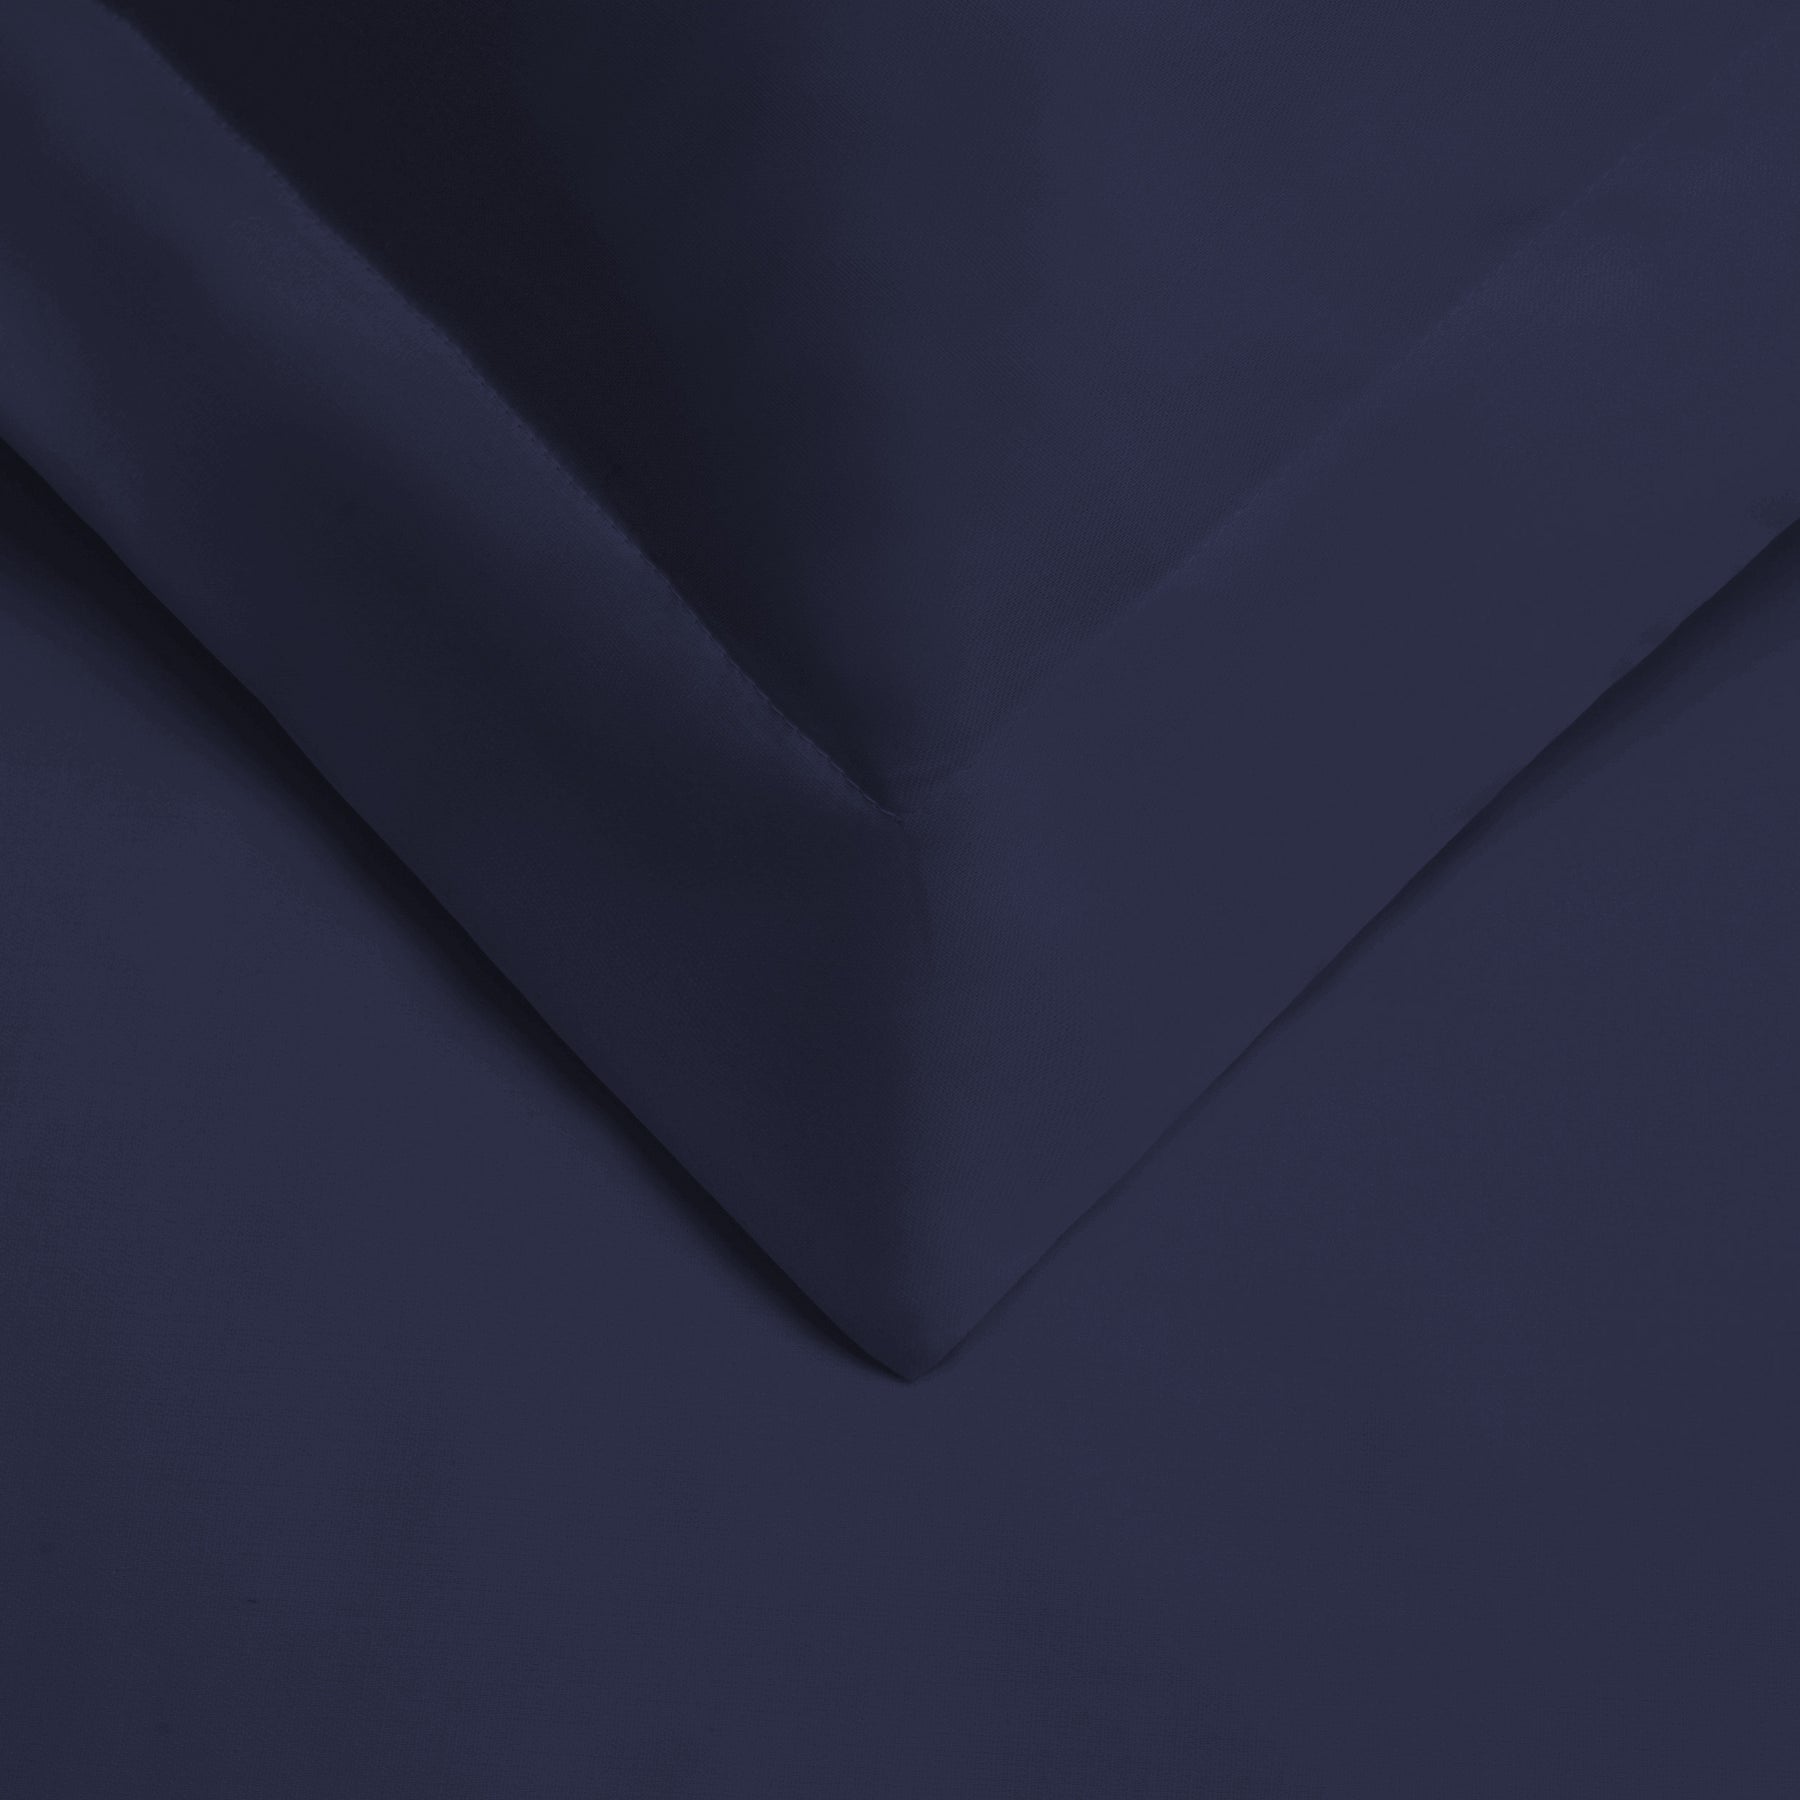 Superior Egyptian Cotton 300 Thread Count Solid Duvet Cover Set -  Navy Blue